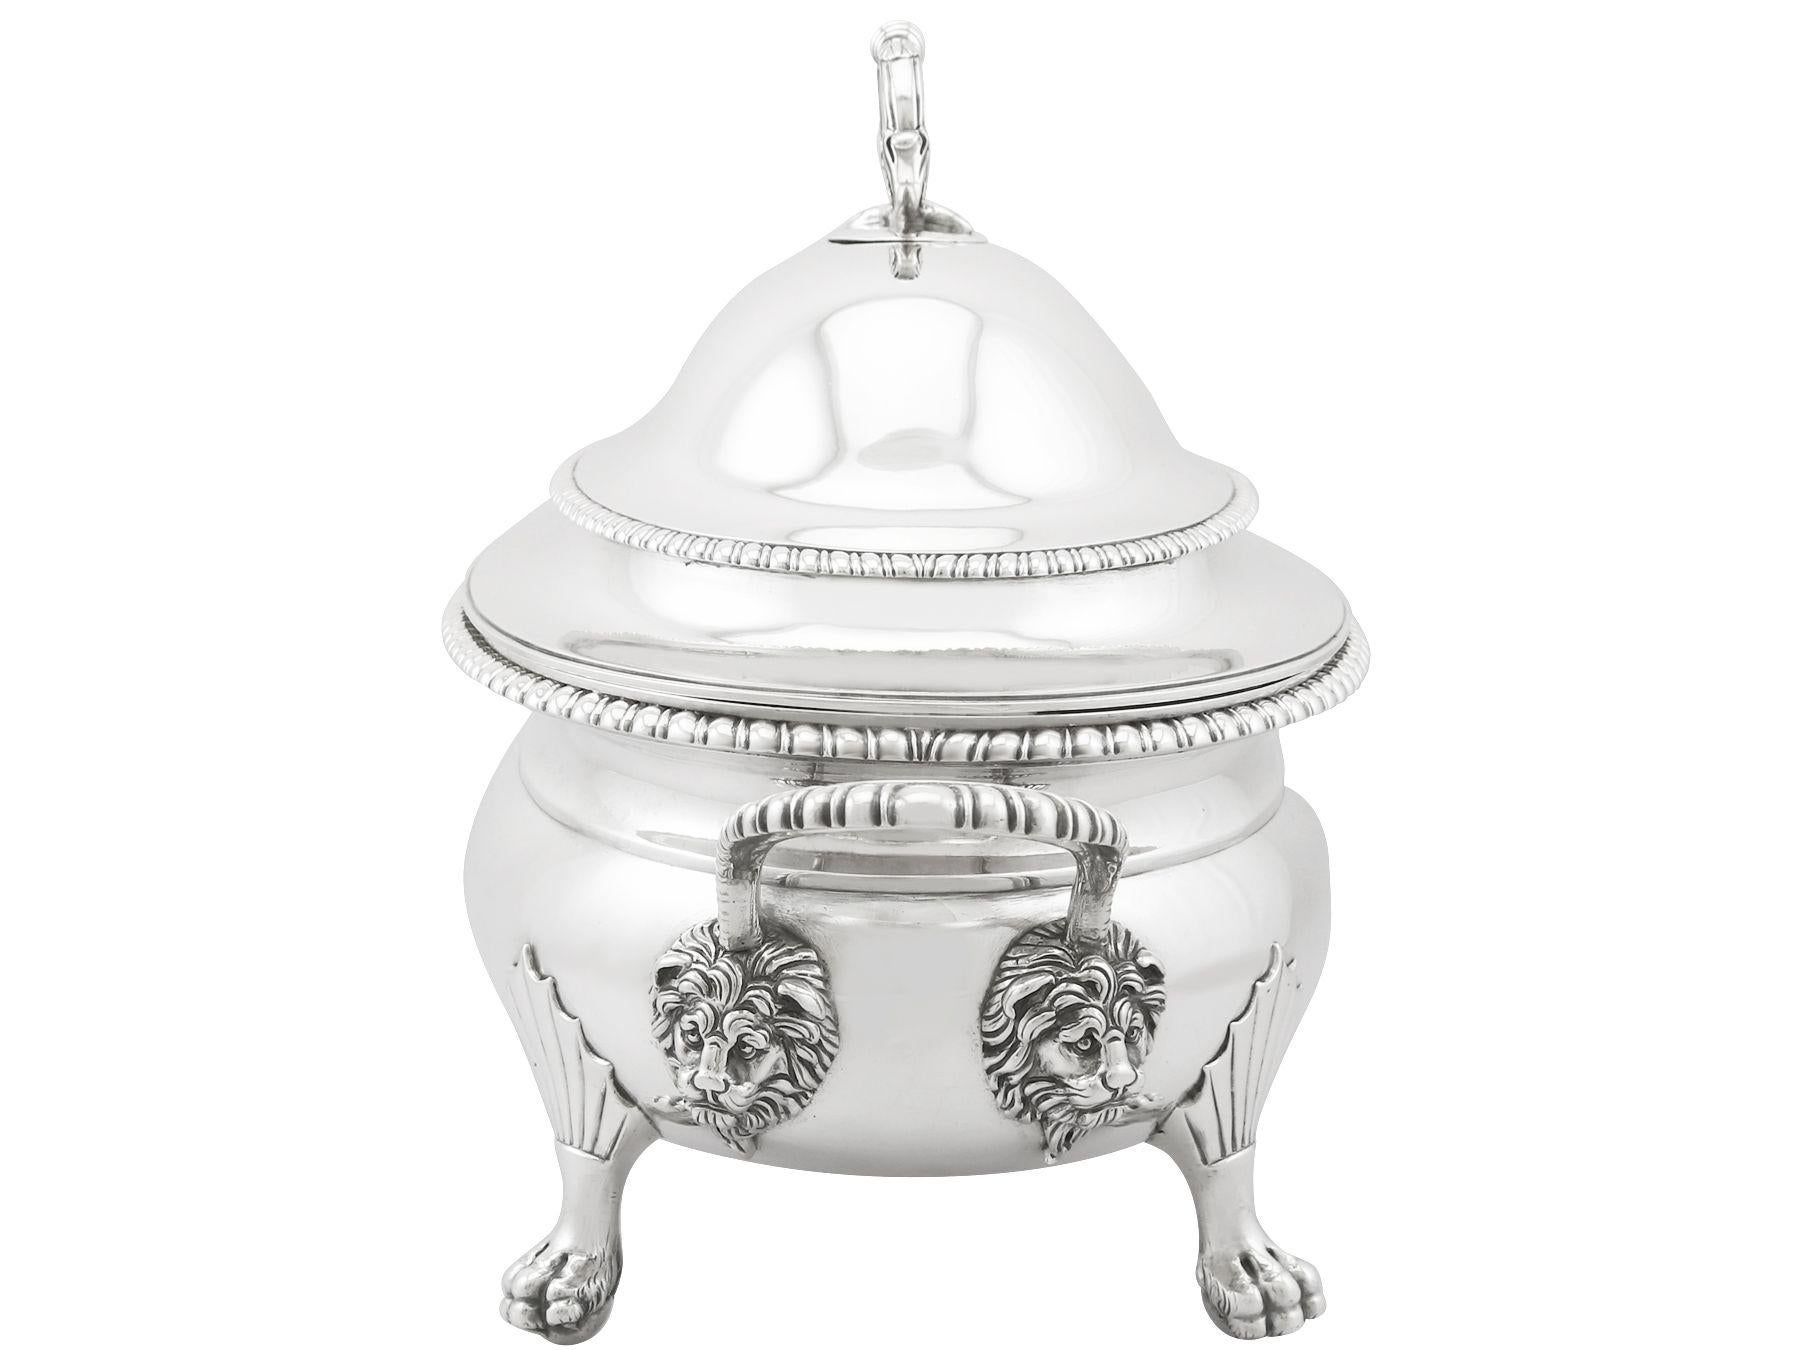 An exceptional, fine and impressive antique Georgian English sterling silver soup tureen; an addition to our collection of serving dishes.

This exceptional antique George III English sterling silver soup tureen has an oval rounded form.

The